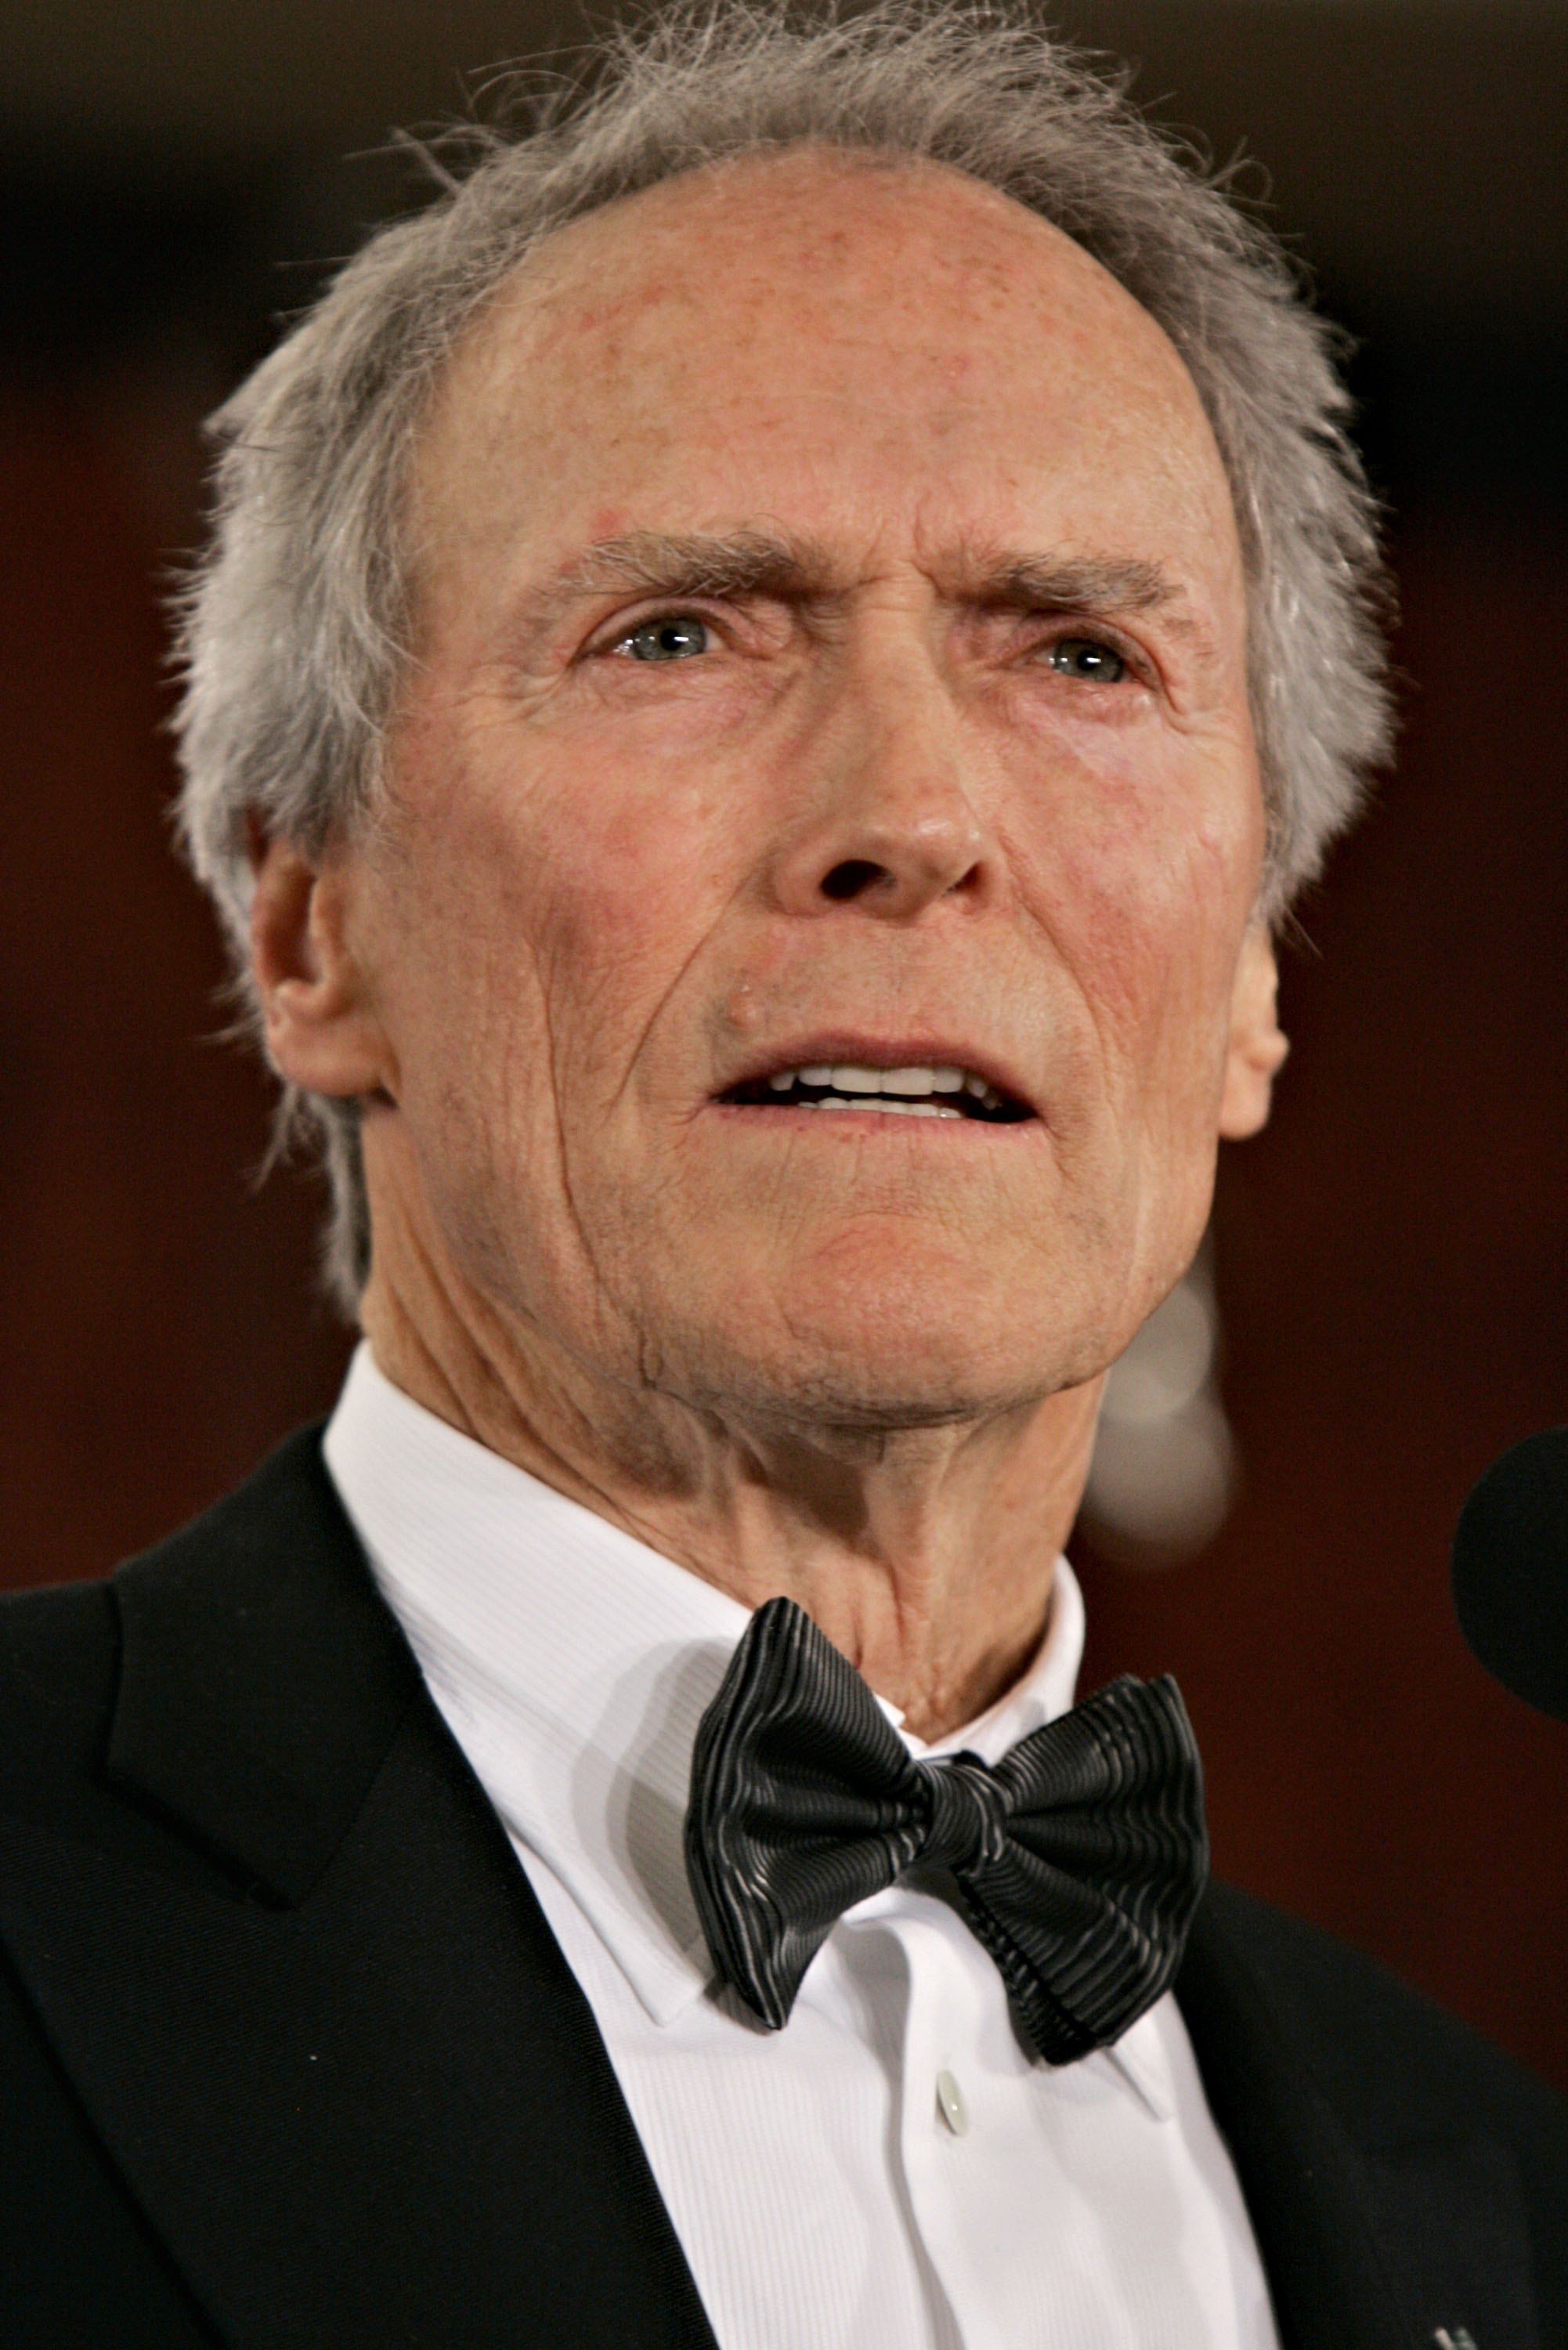 Clint Eastwood accepting his Lifetime Achievement Award during the 58th Annual Directors Guild Of America Awards on January 28, 2006, in Los Angeles, California | Photo: Kevin Winter/Getty Images